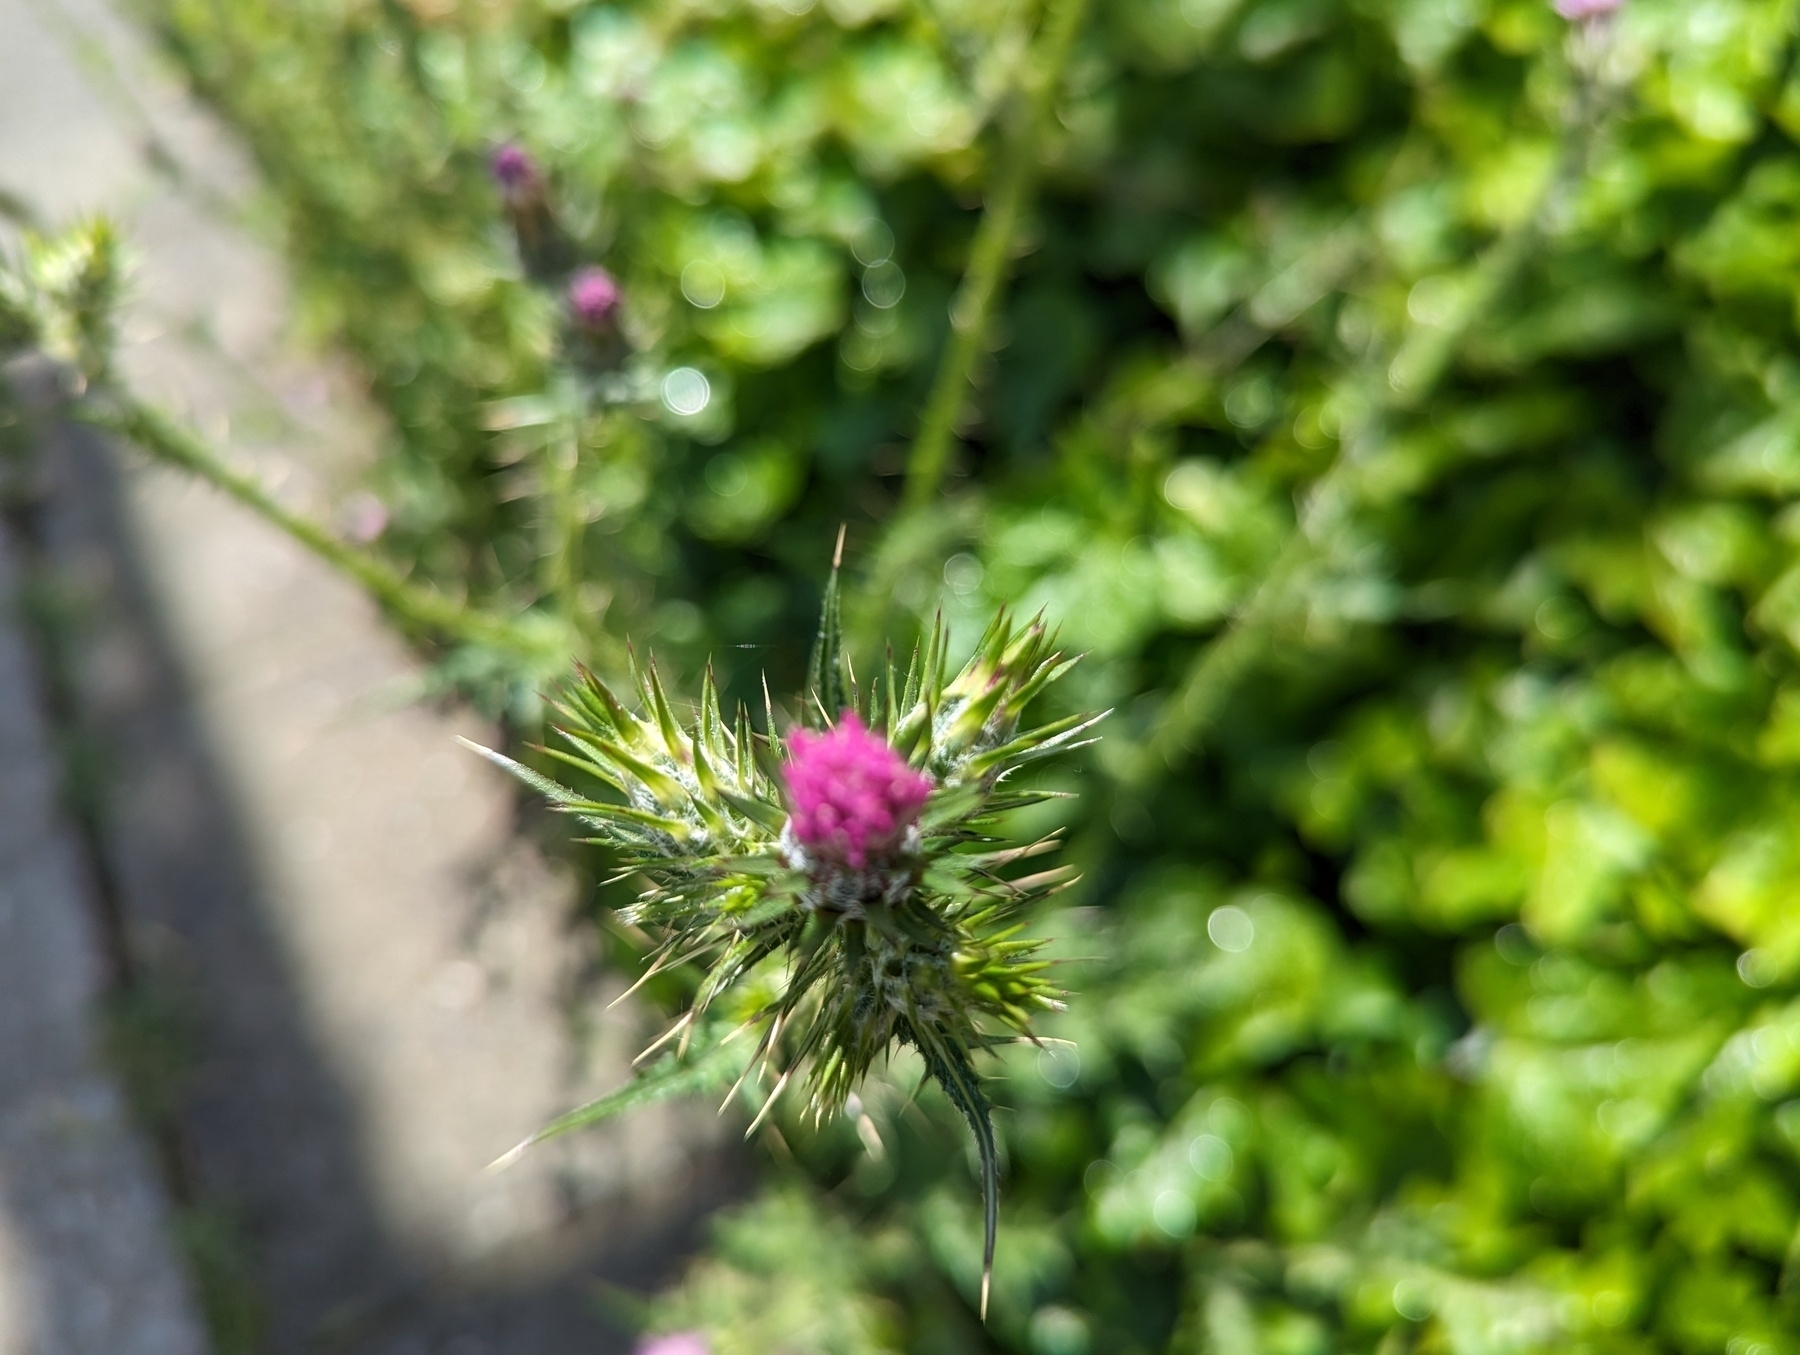 A neon pink flower bursts like a firework out of a long prickly green thistle stalk against a field of out of focus greenery and gray sidewalk concrete under sunny skies Monday, May 8, 2023 in San Pablo, California.